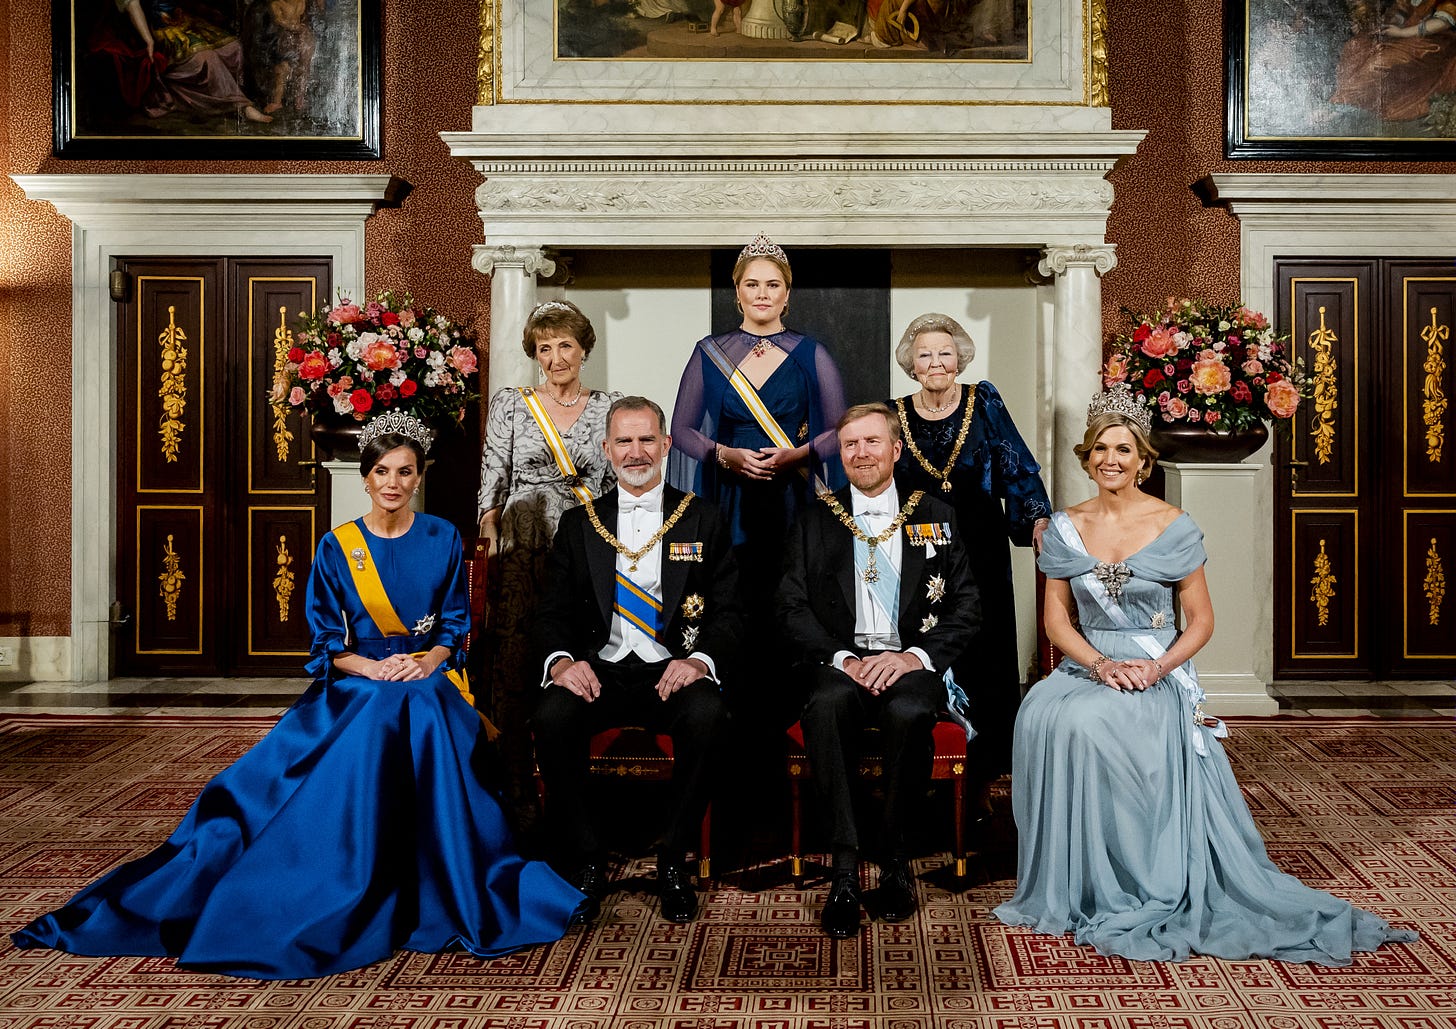 Spanish and Dutch royals pose for a photograph at Dutch state banquet